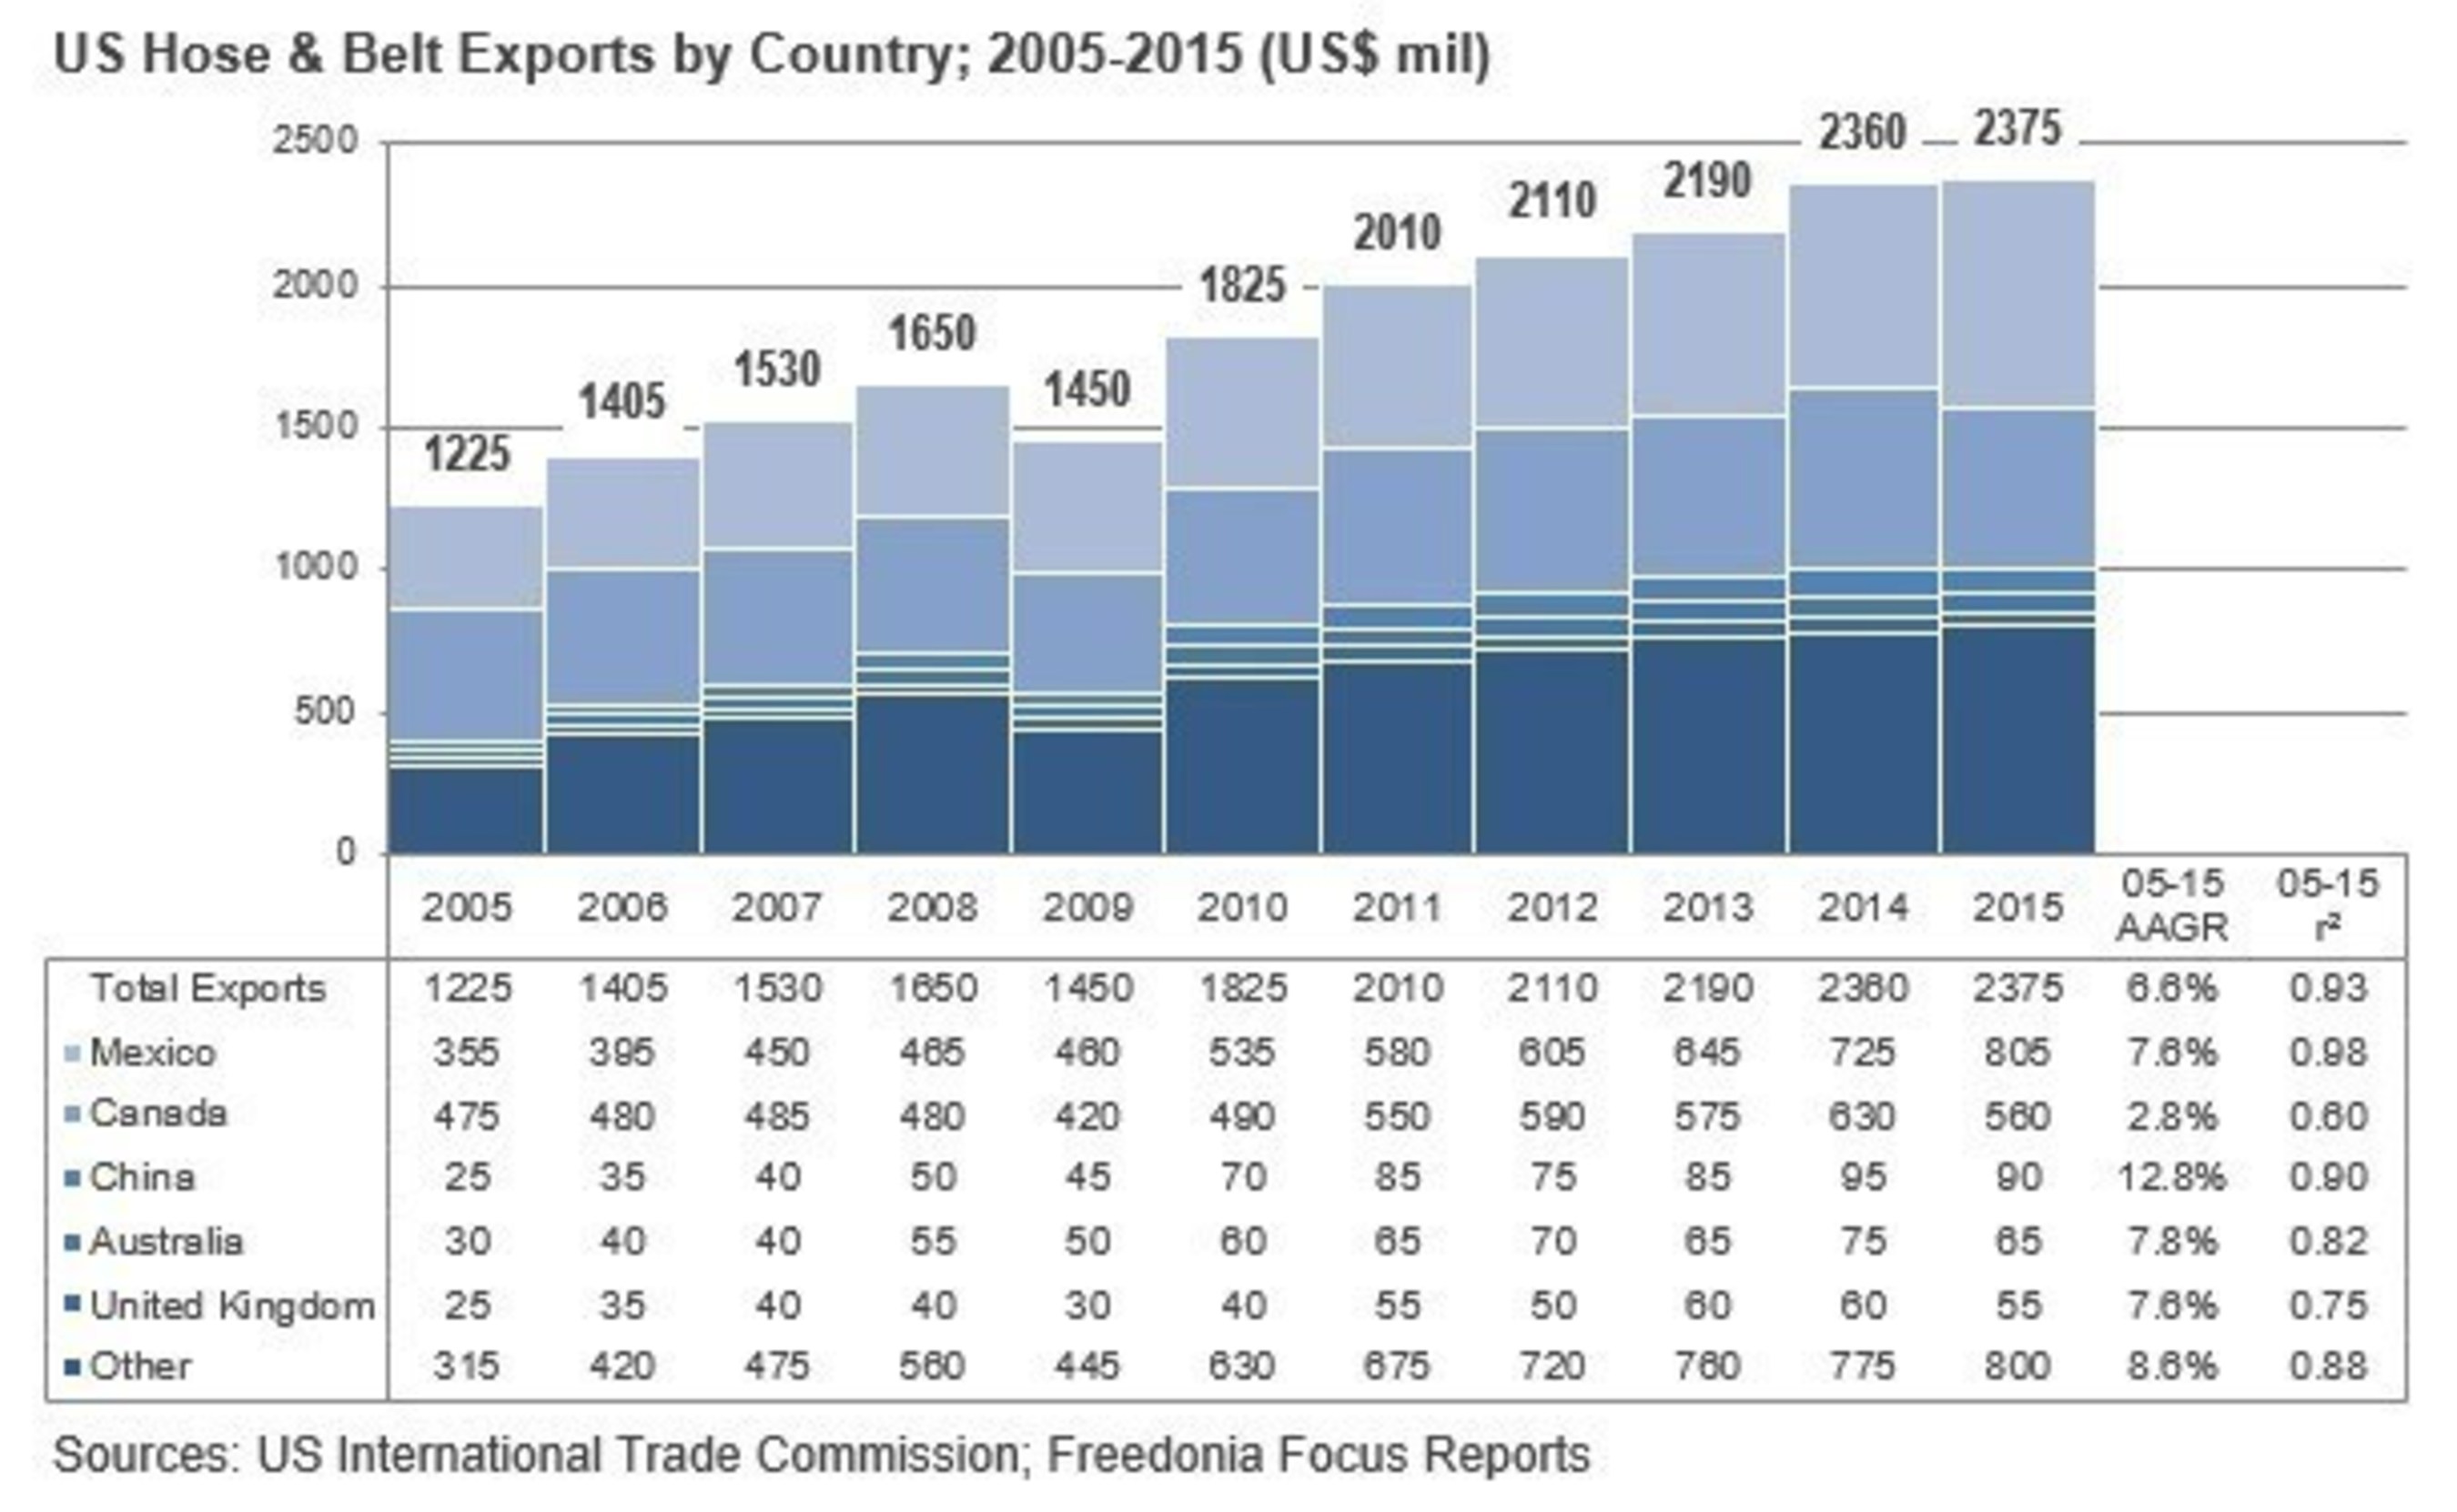 US Hose & Belt Exports by Country